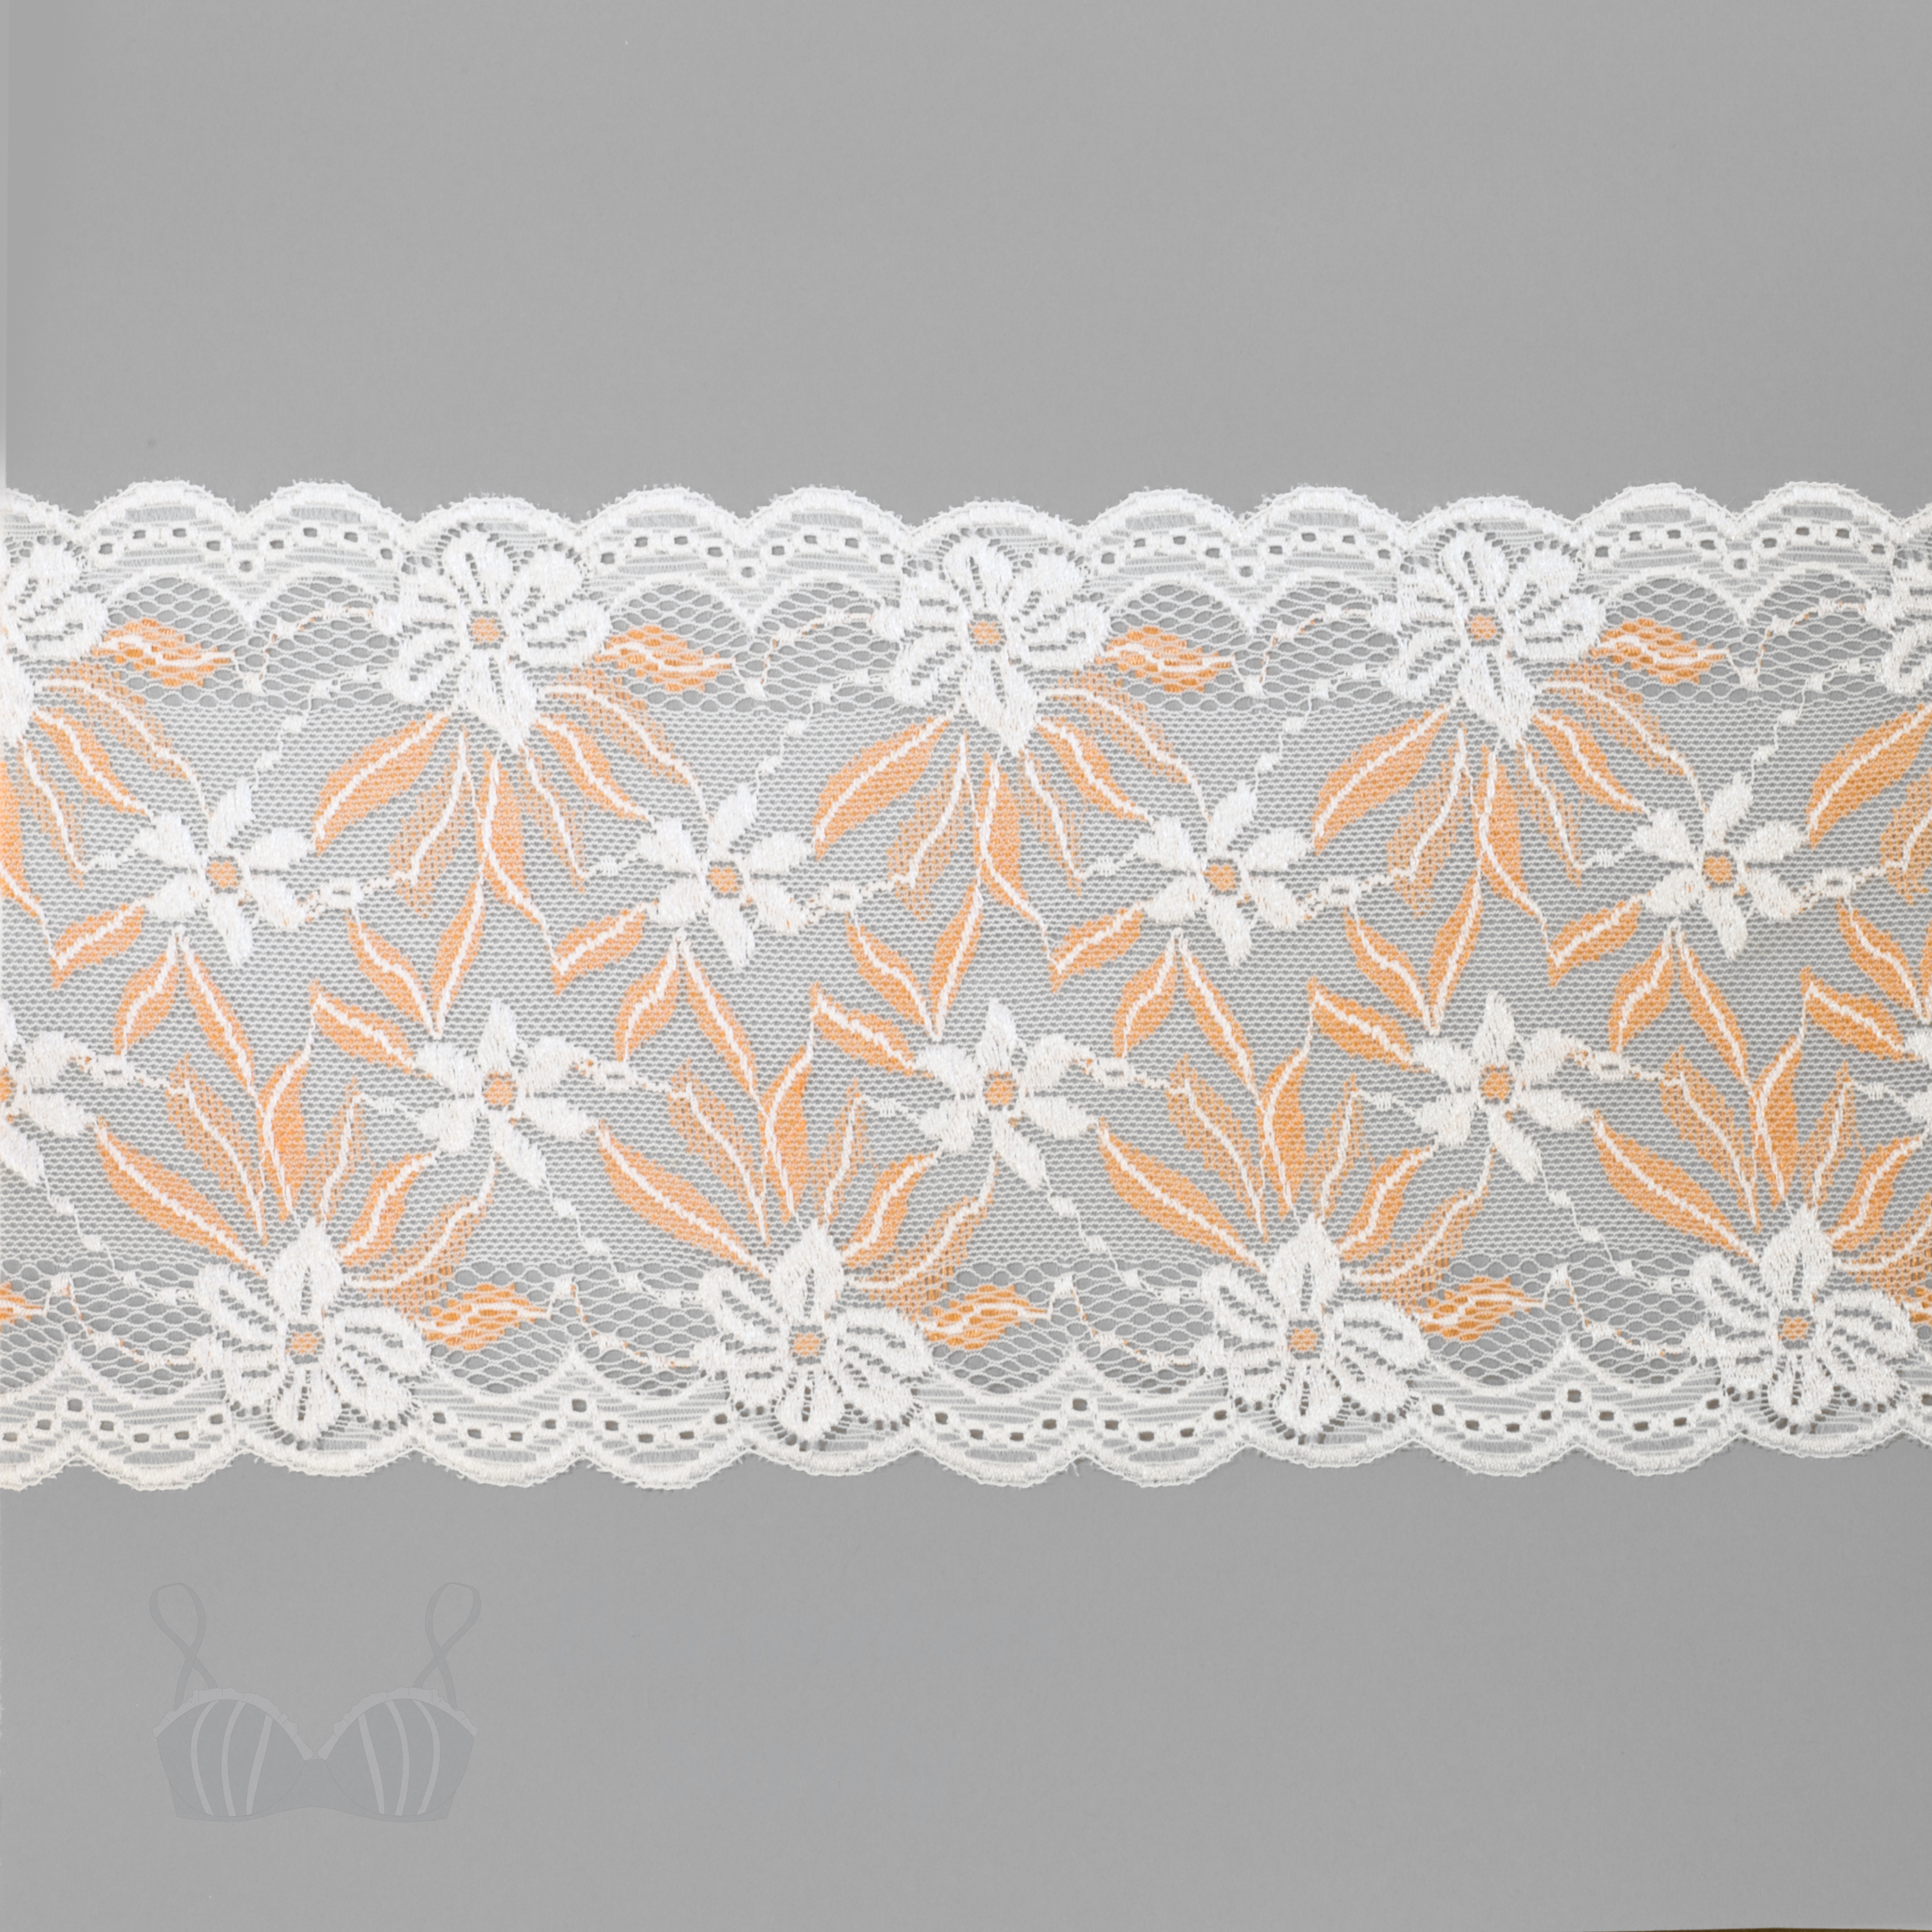 stretch laces - 5 inch - 13 cm five inch peach dark coral floral stretch lace LS-63 3638 from Bra-Makers Supply